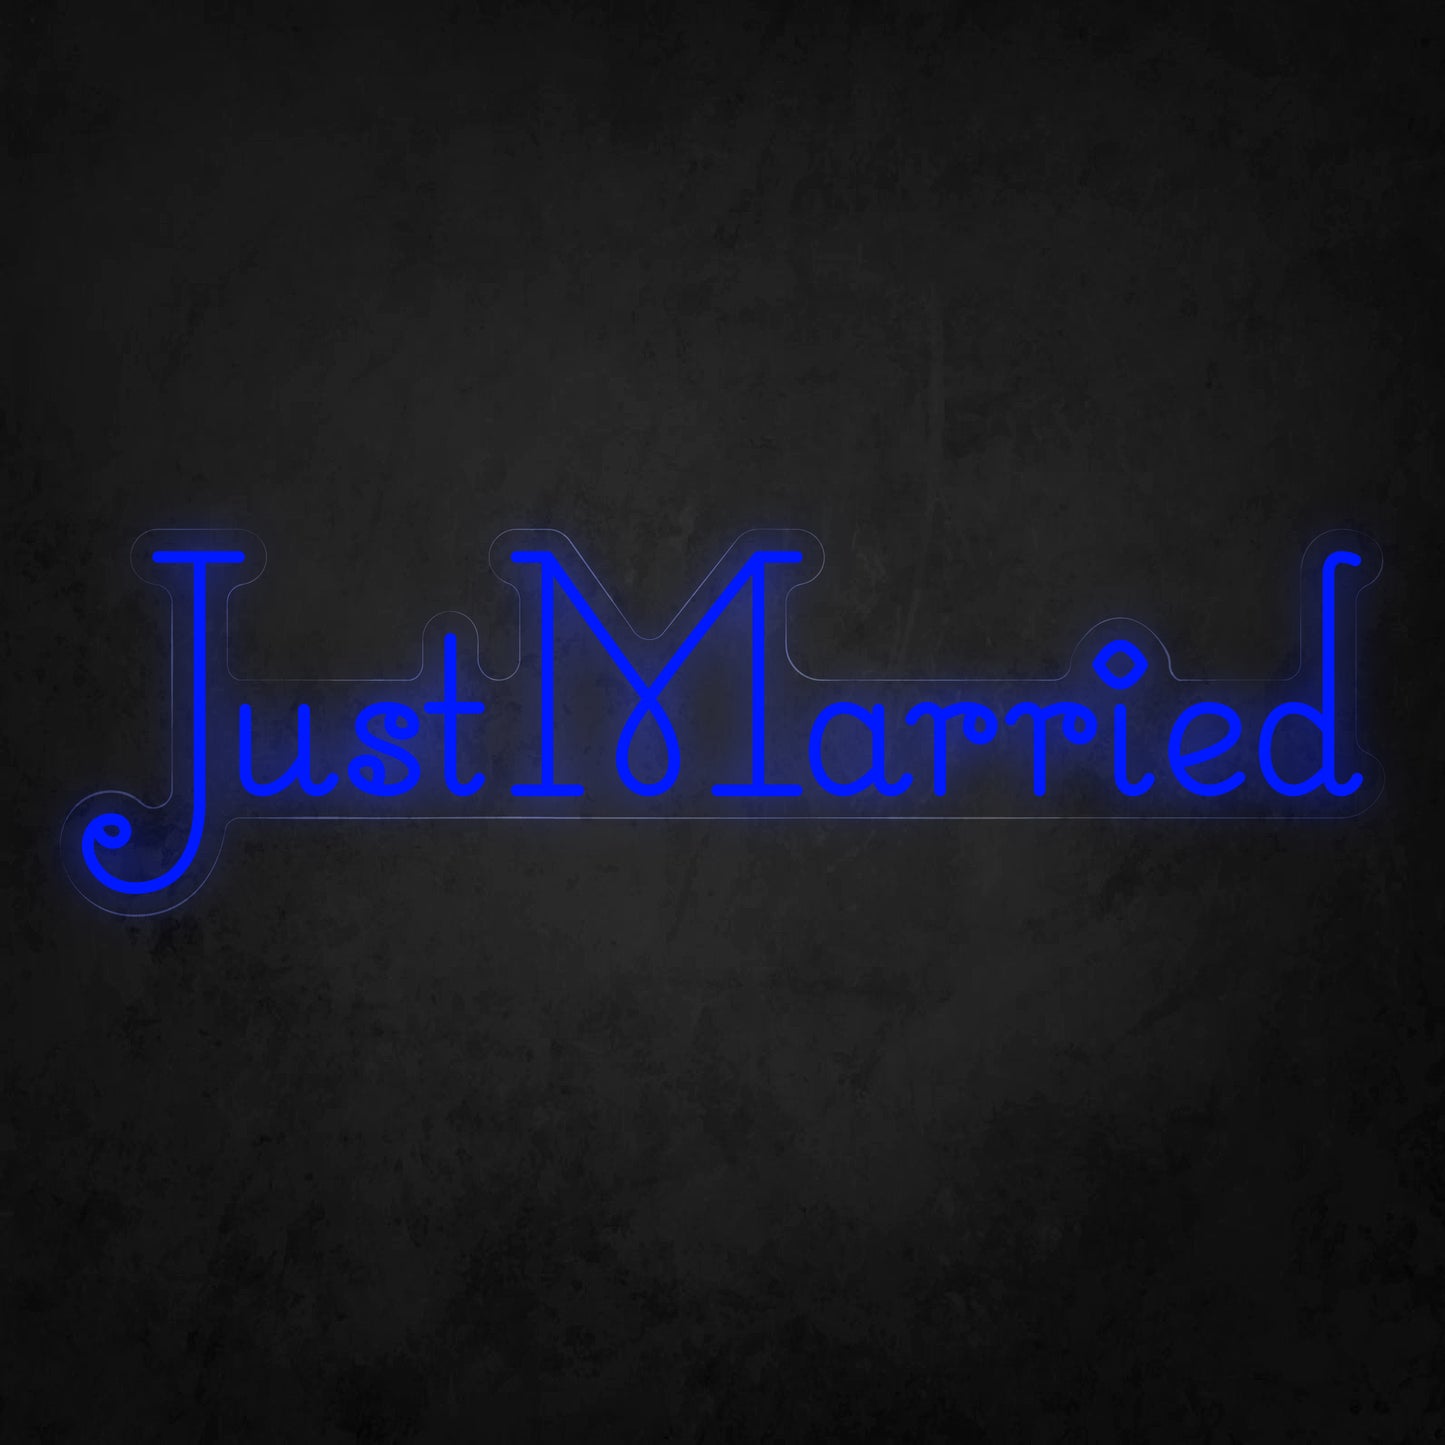 LED Neon Sign - Just Married